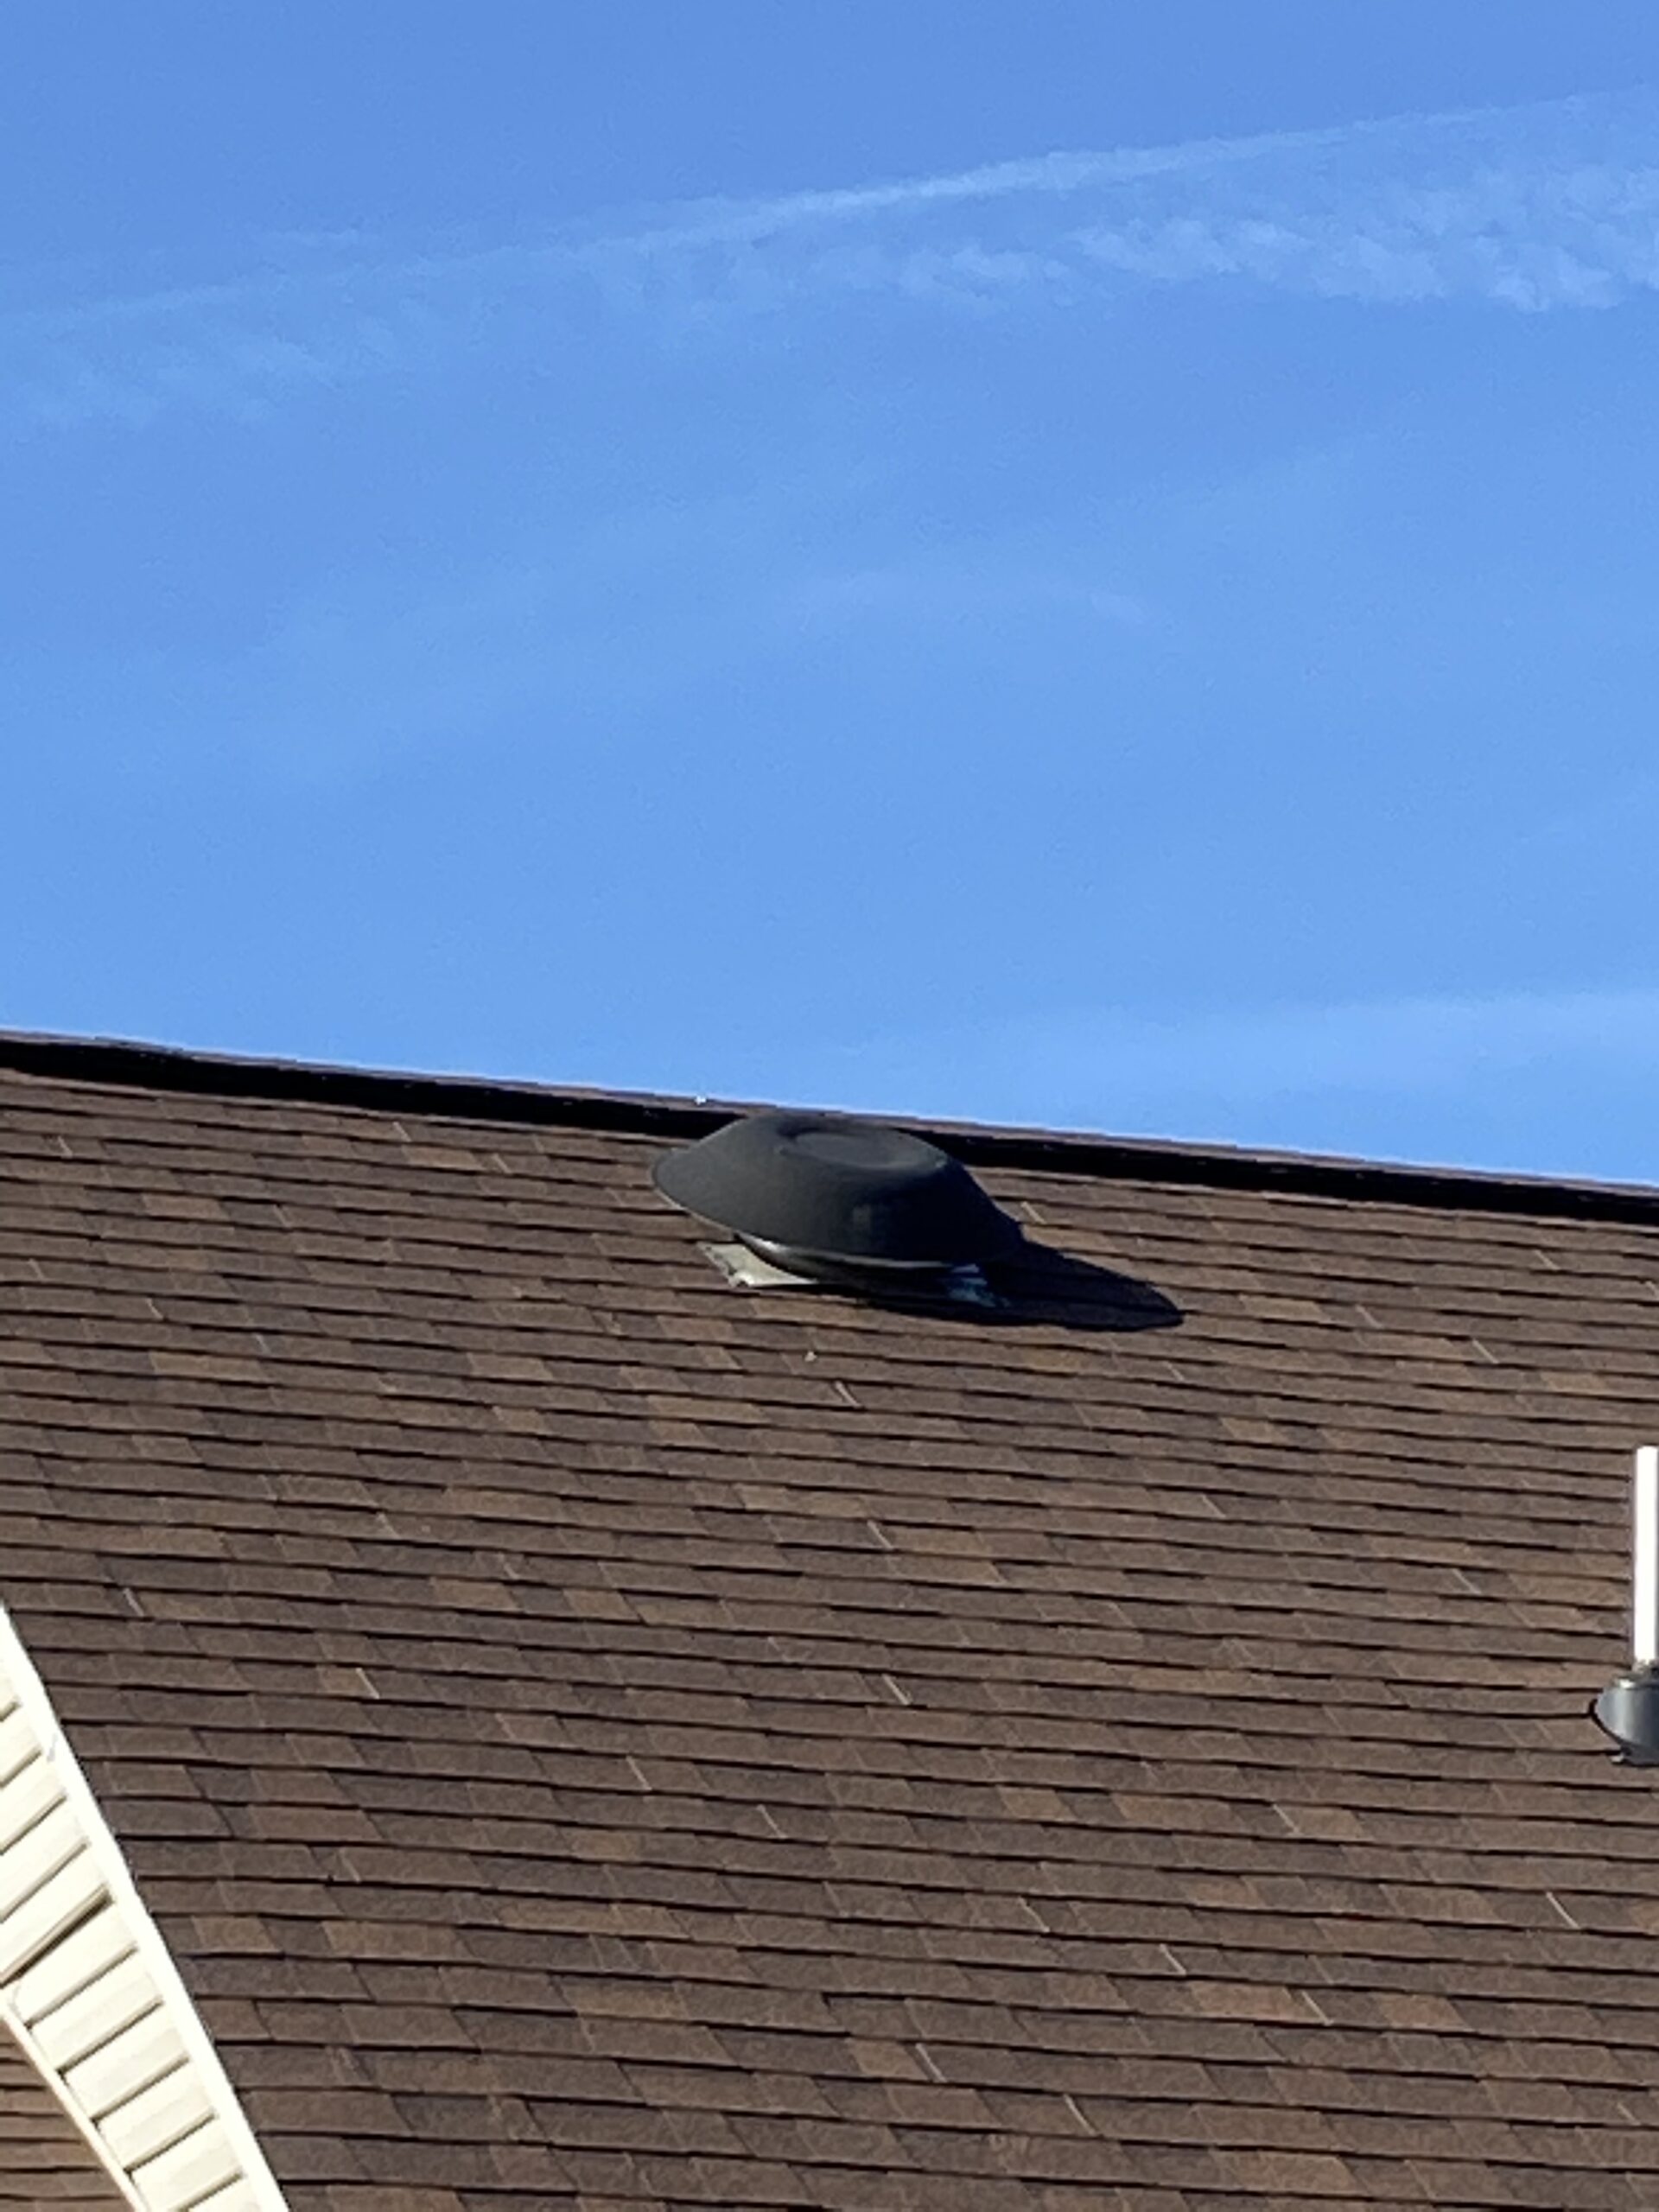 This is a picture of a brown roof with a round roof vent in it